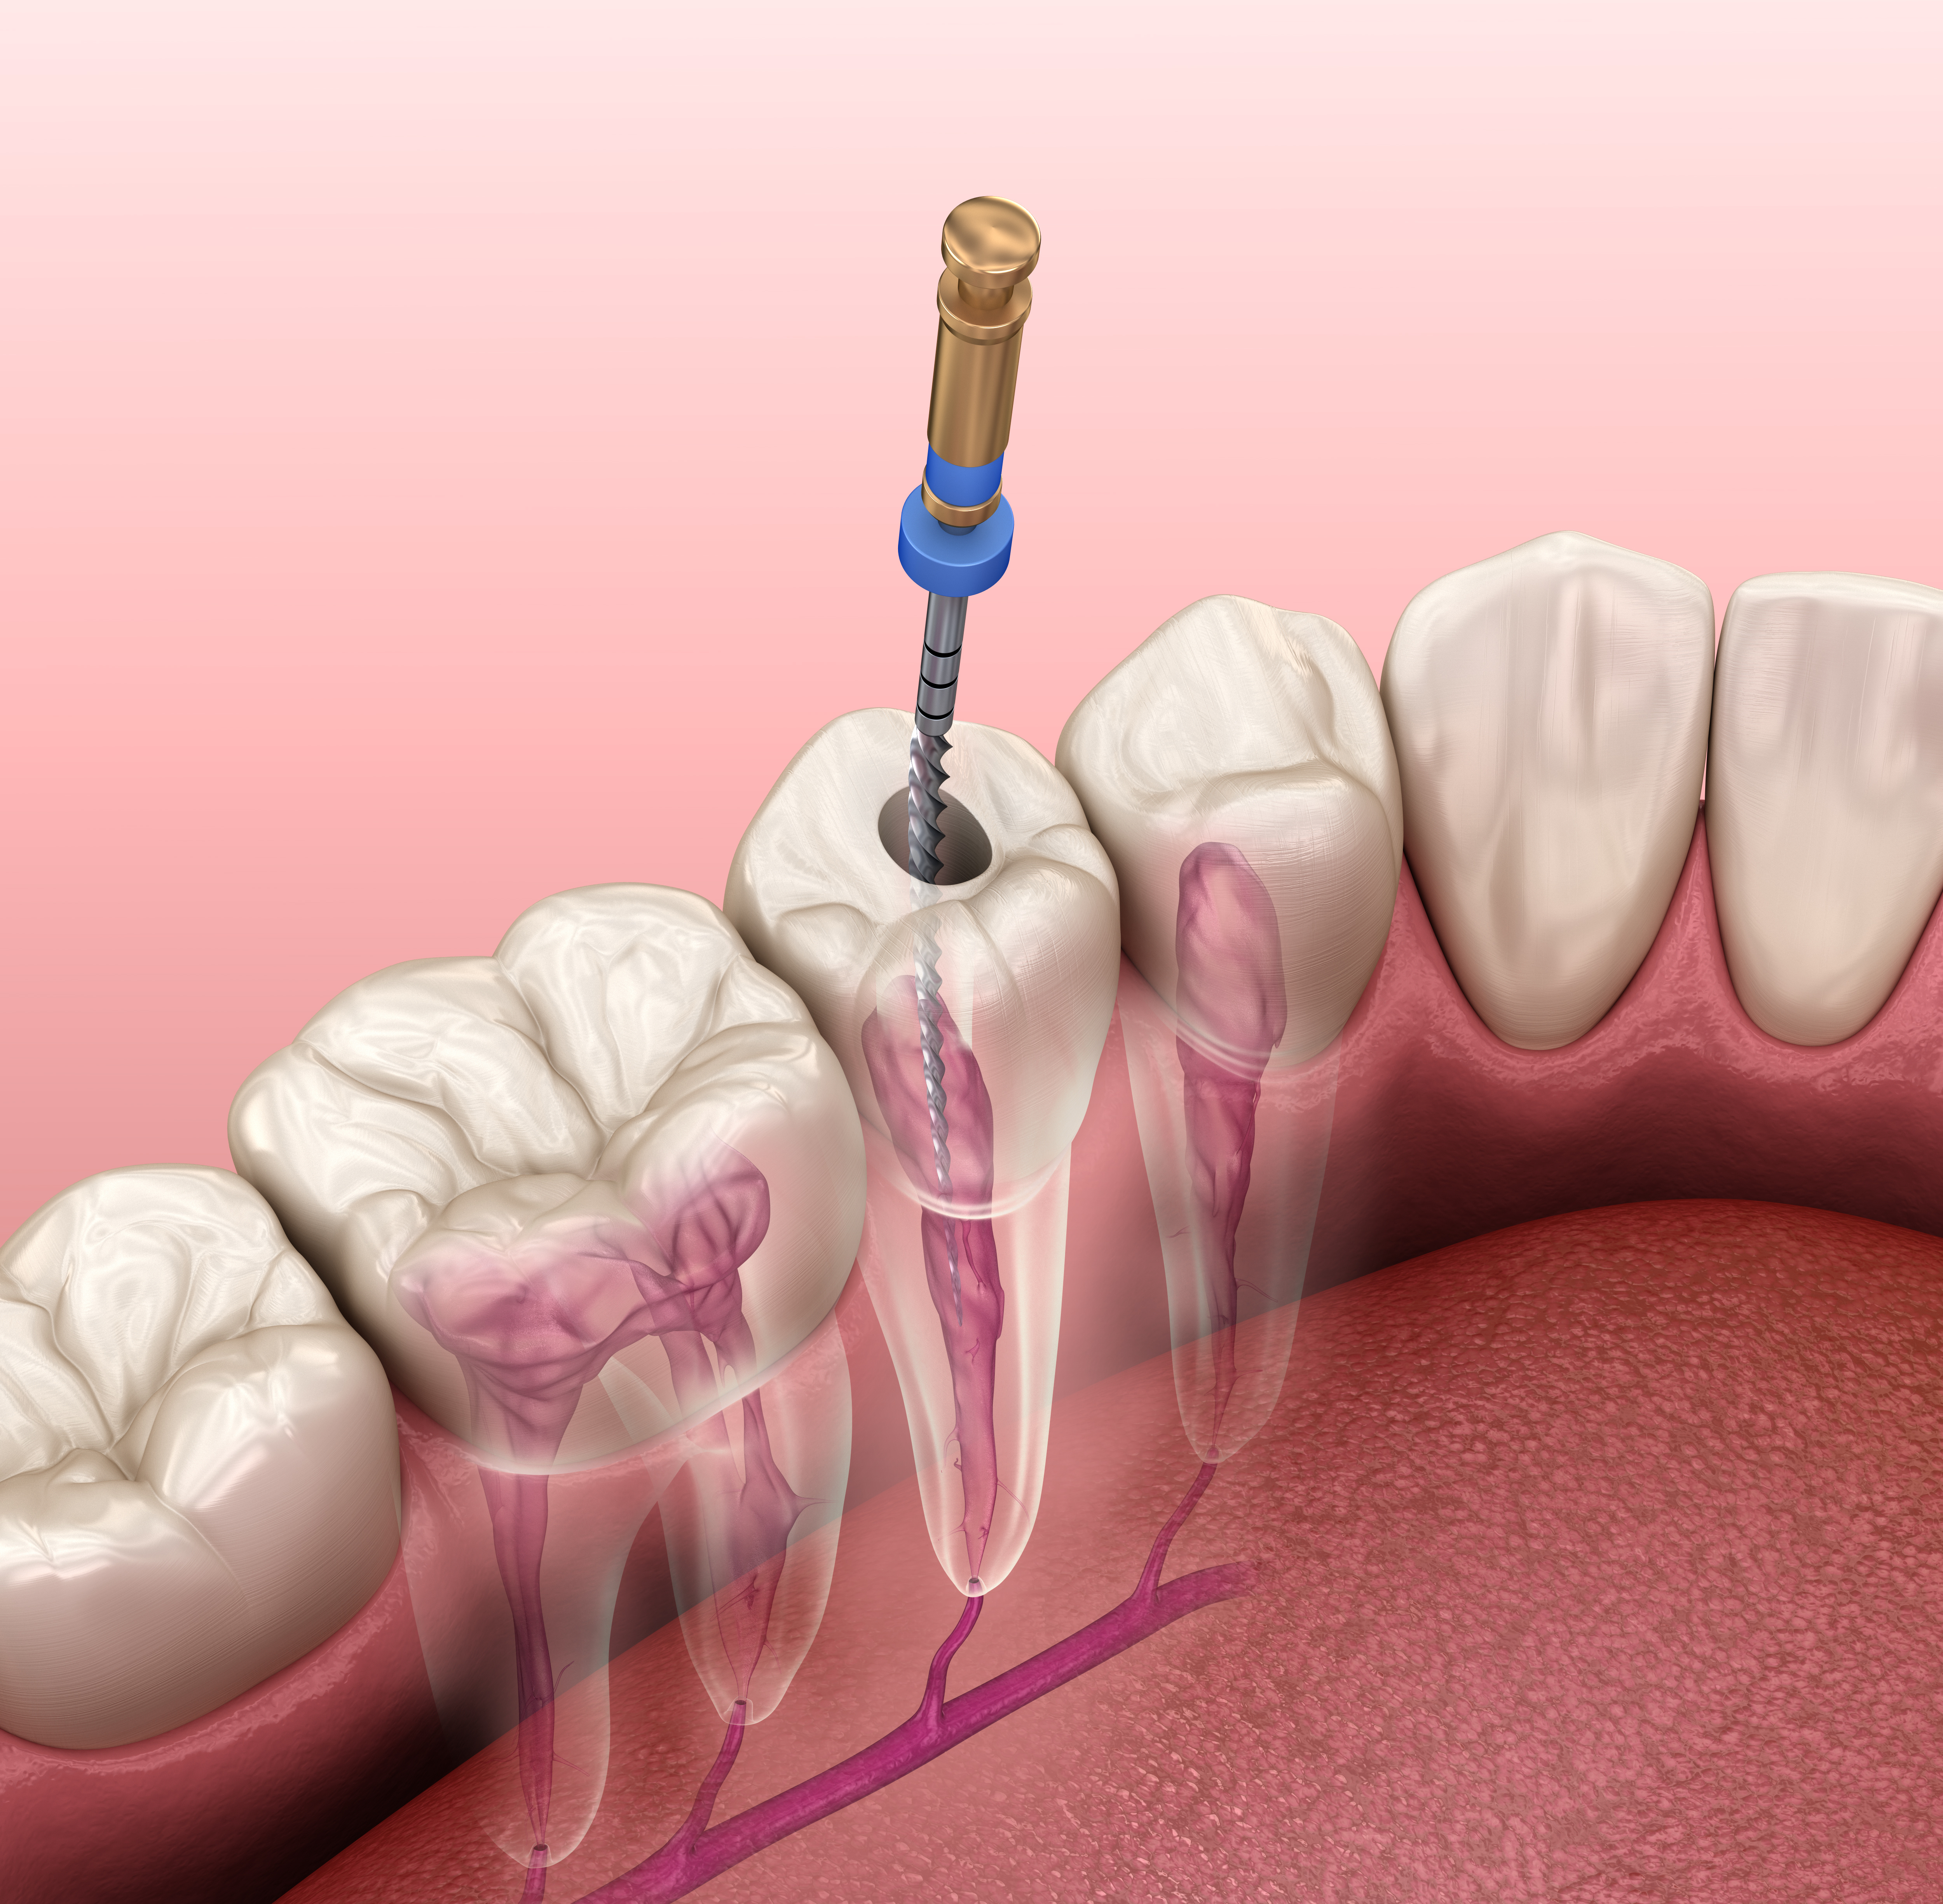 Treatment of tooth and removal nerve 3d illustration (5).jpg